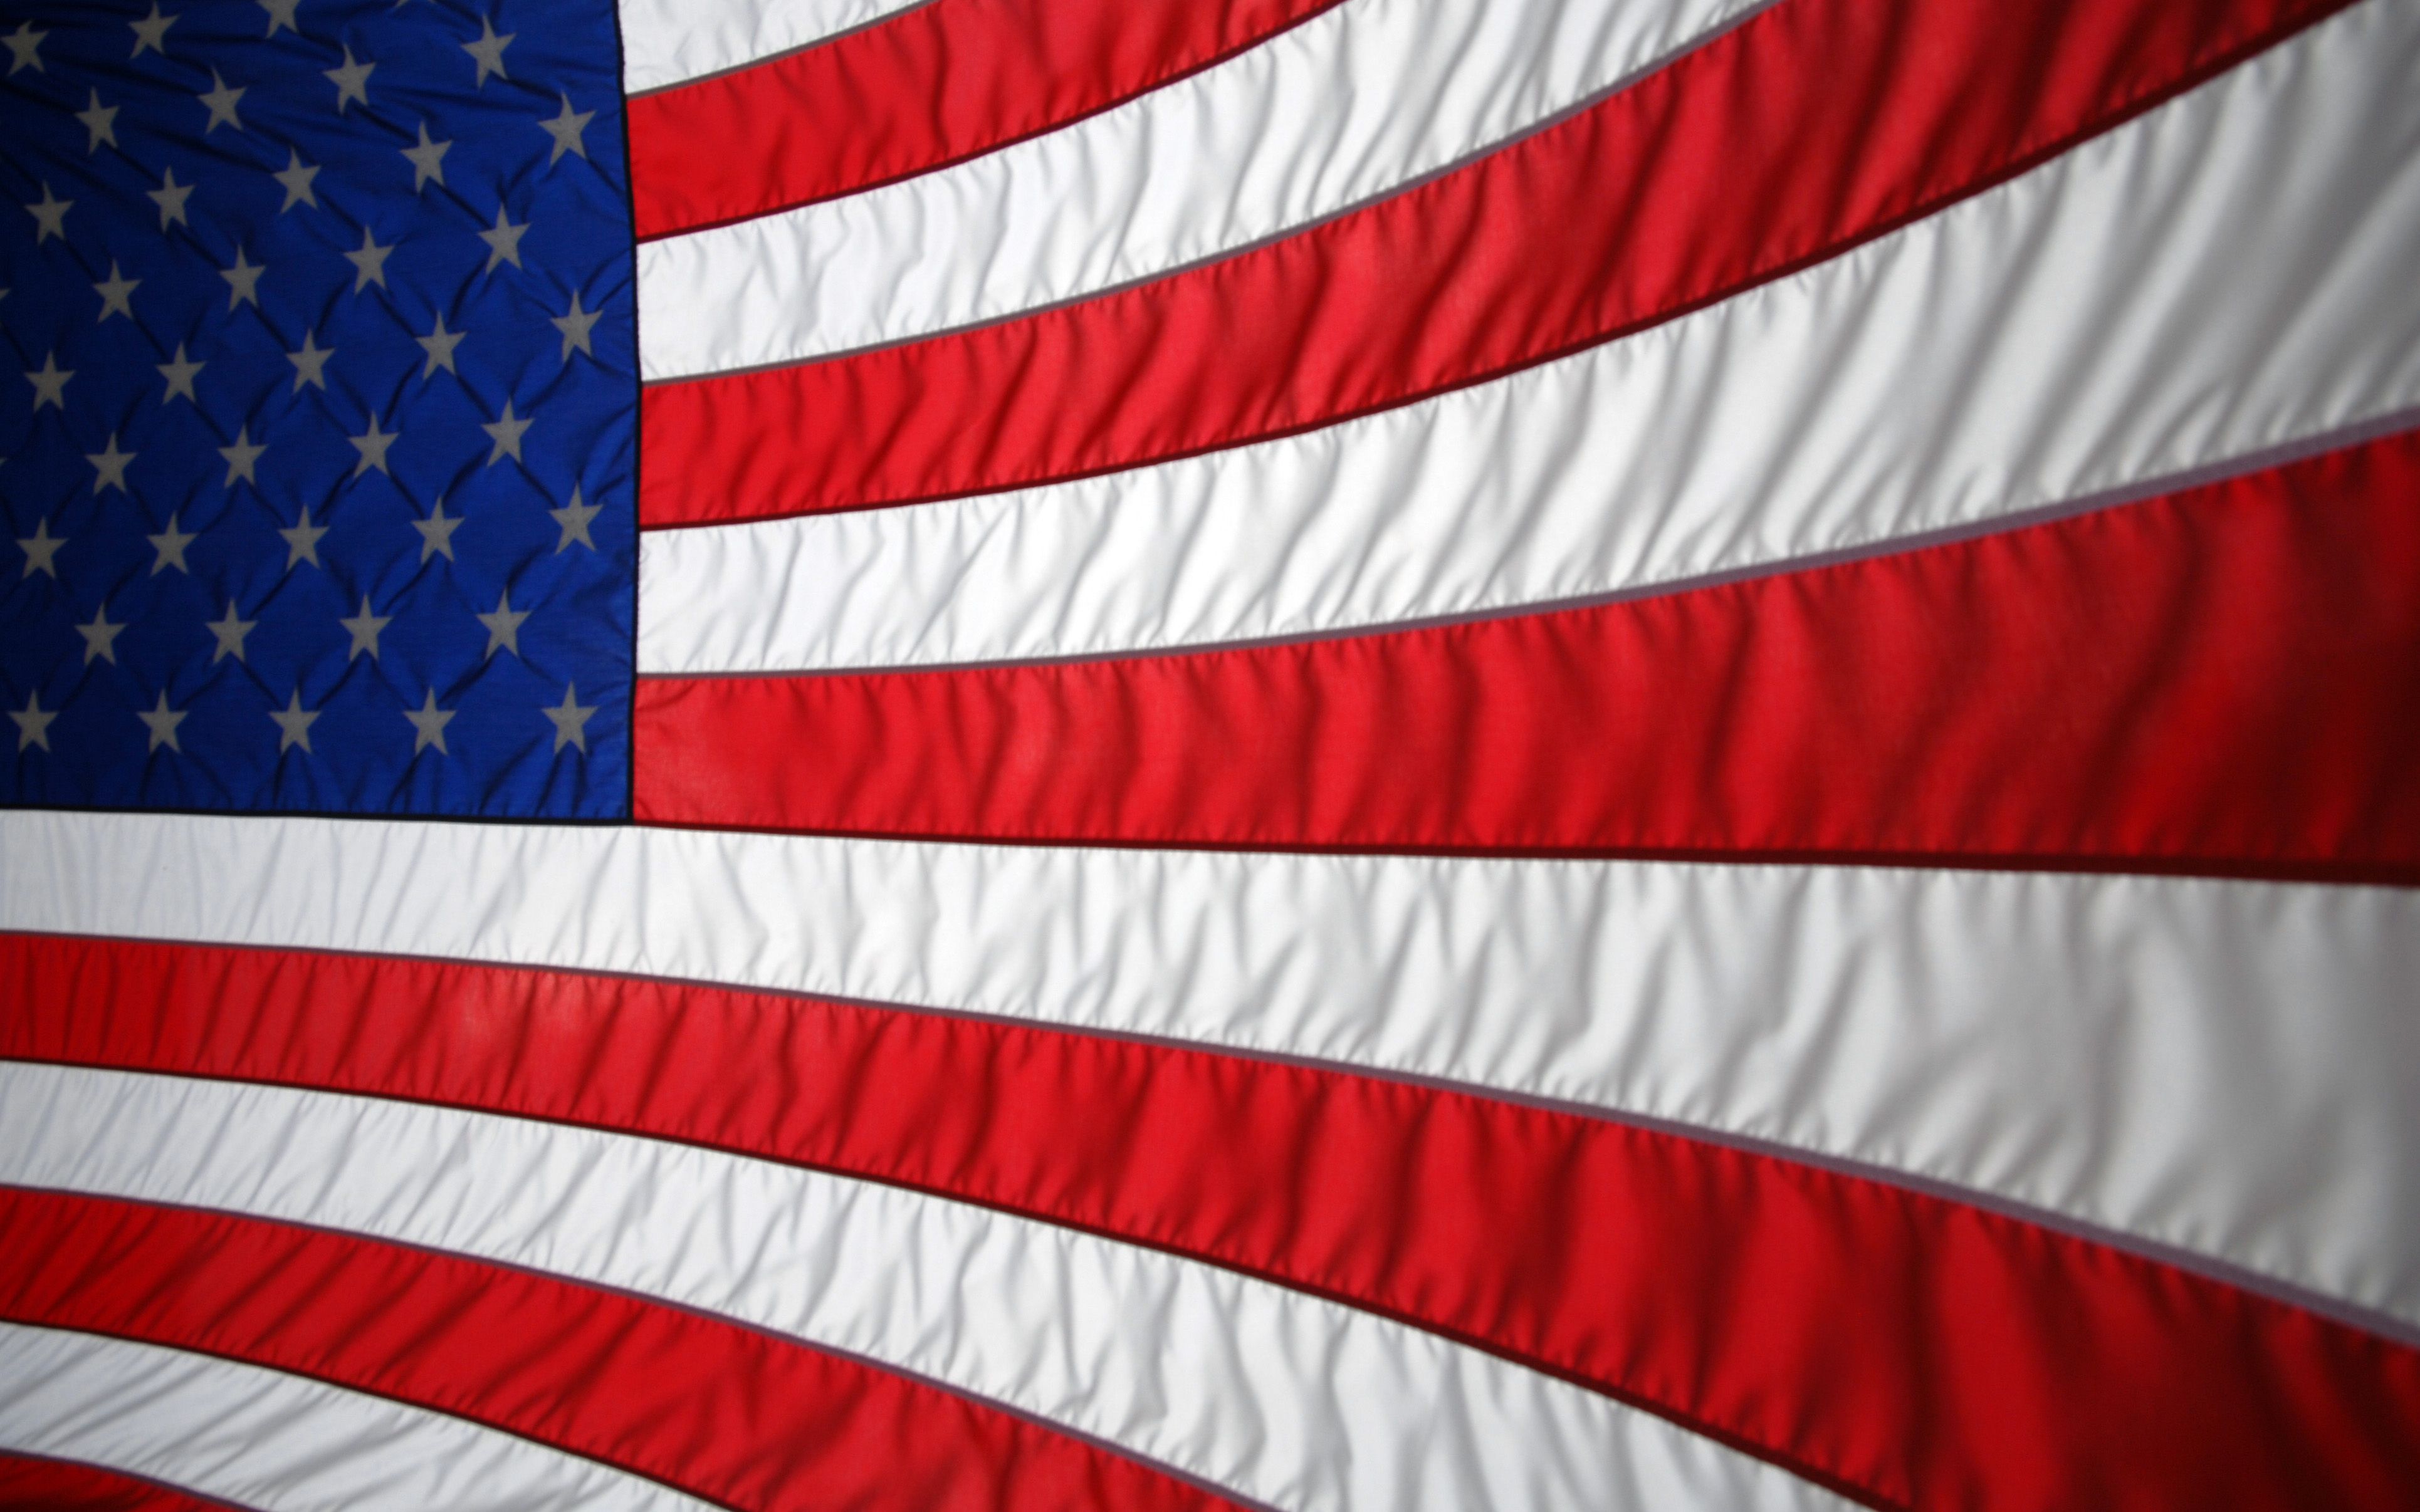 American Flag Backgrounds | Wallpapers, Backgrounds, Images, Art ...